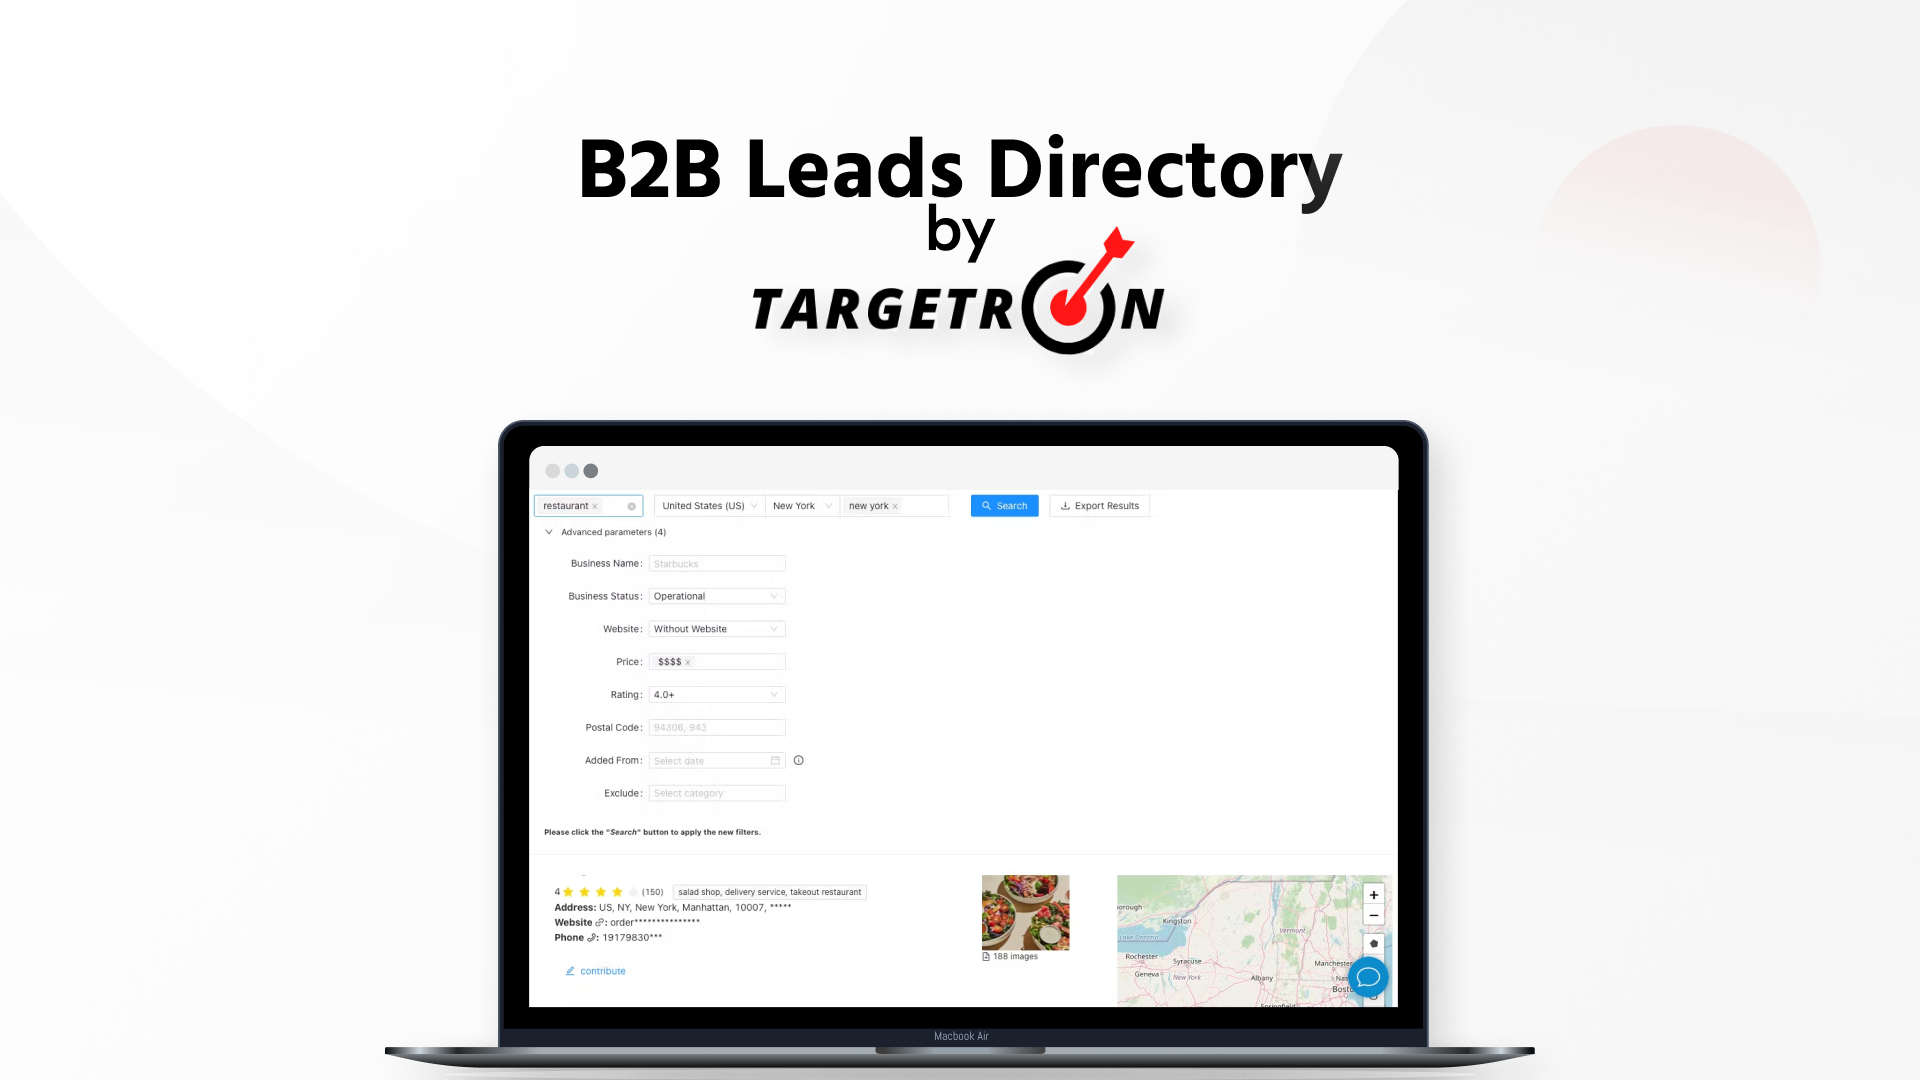 AppSumo Deal for B2B Leads Directory by Targetron